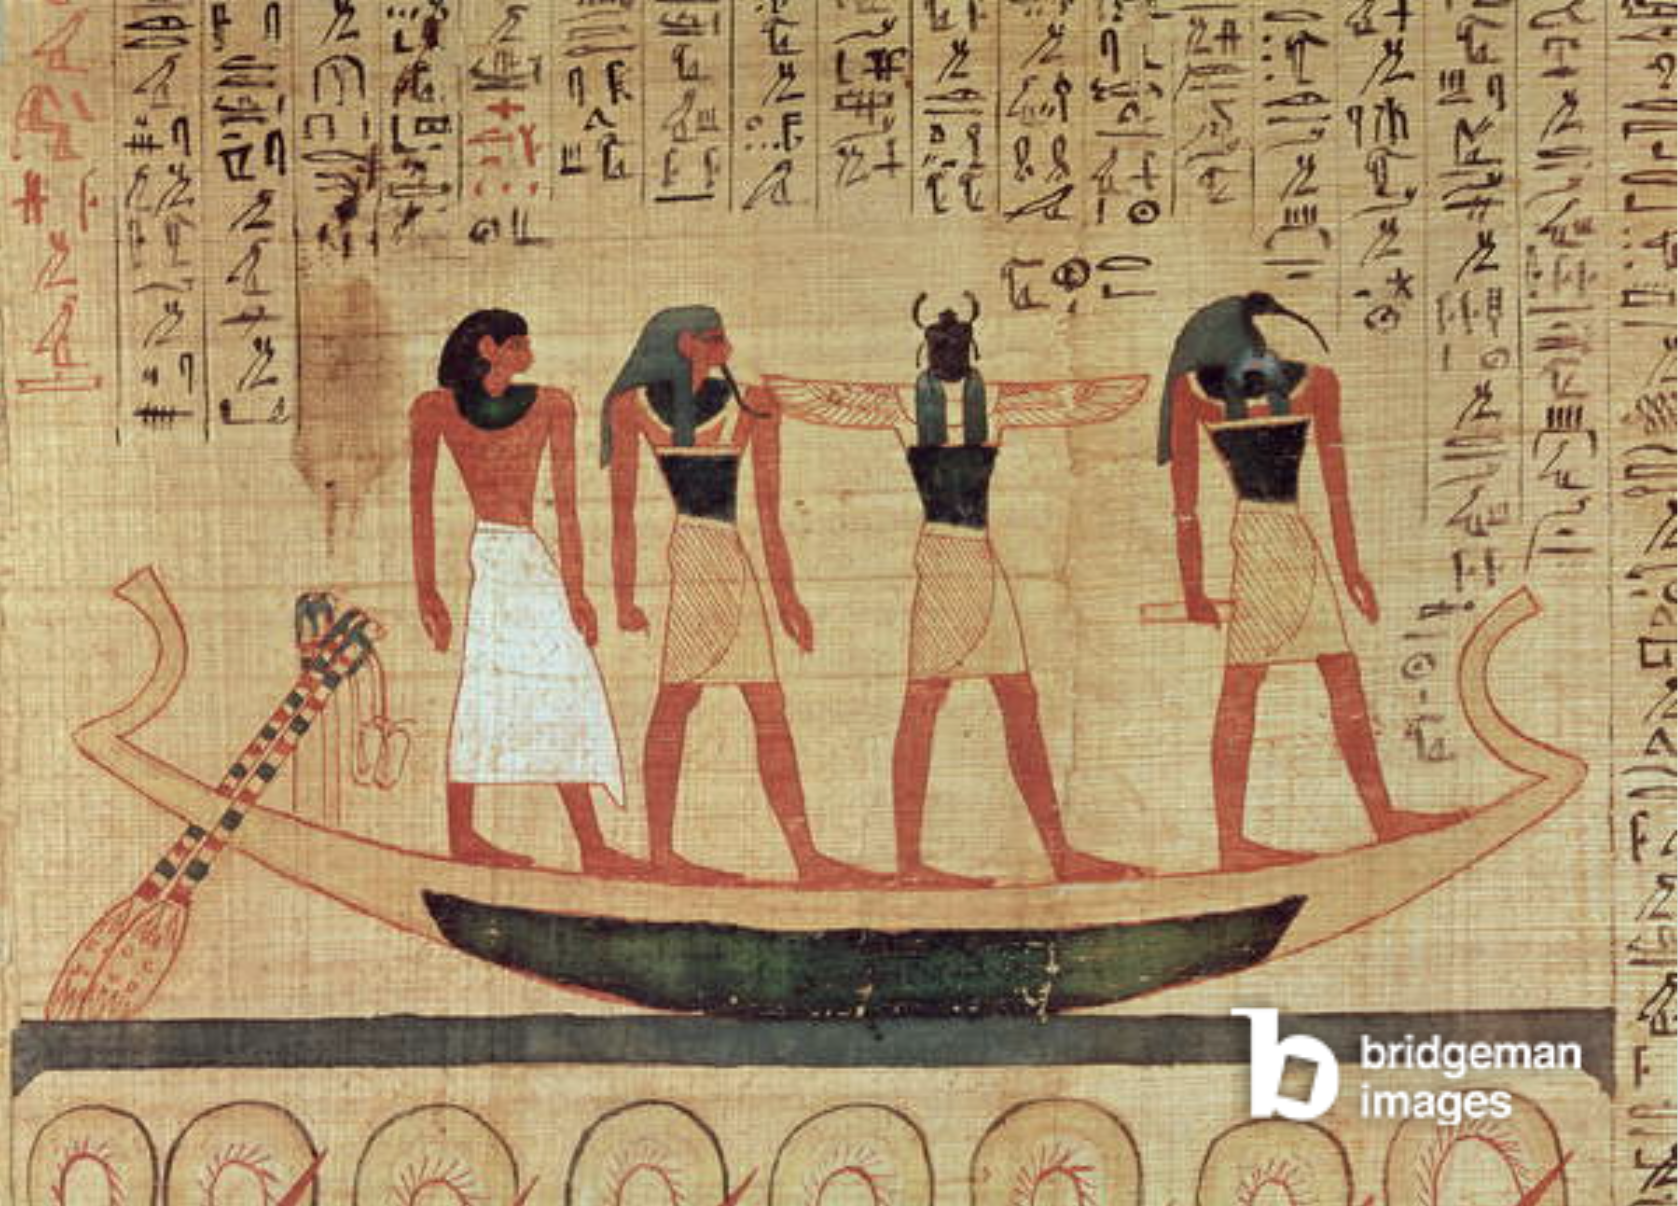 Papyrus depicting a man being transported on a barque to the afterlife by Thoth, Khepri and another god, Mythological papyrus of Imenemsaouf, Third Intermediate Period, c.1000 BC (painted papyrus) (detail), Egyptian 21st Dynasty (c.1069-945 BC) / Louvre, Paris, France / Bridgeman Images